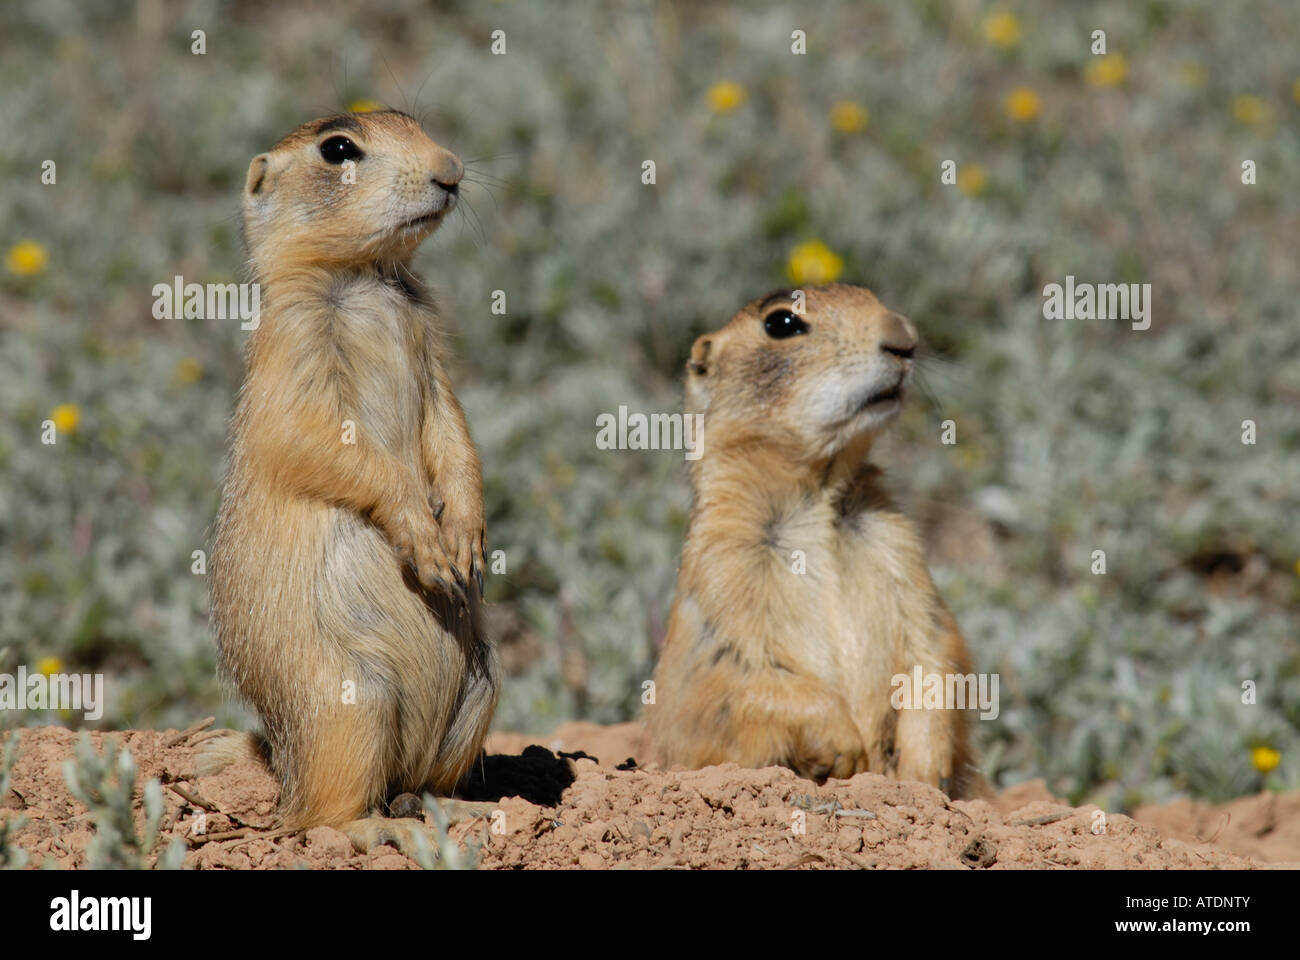 Stock photo of two young Utah prairie dogs by their burrow entrance. Stock Photo